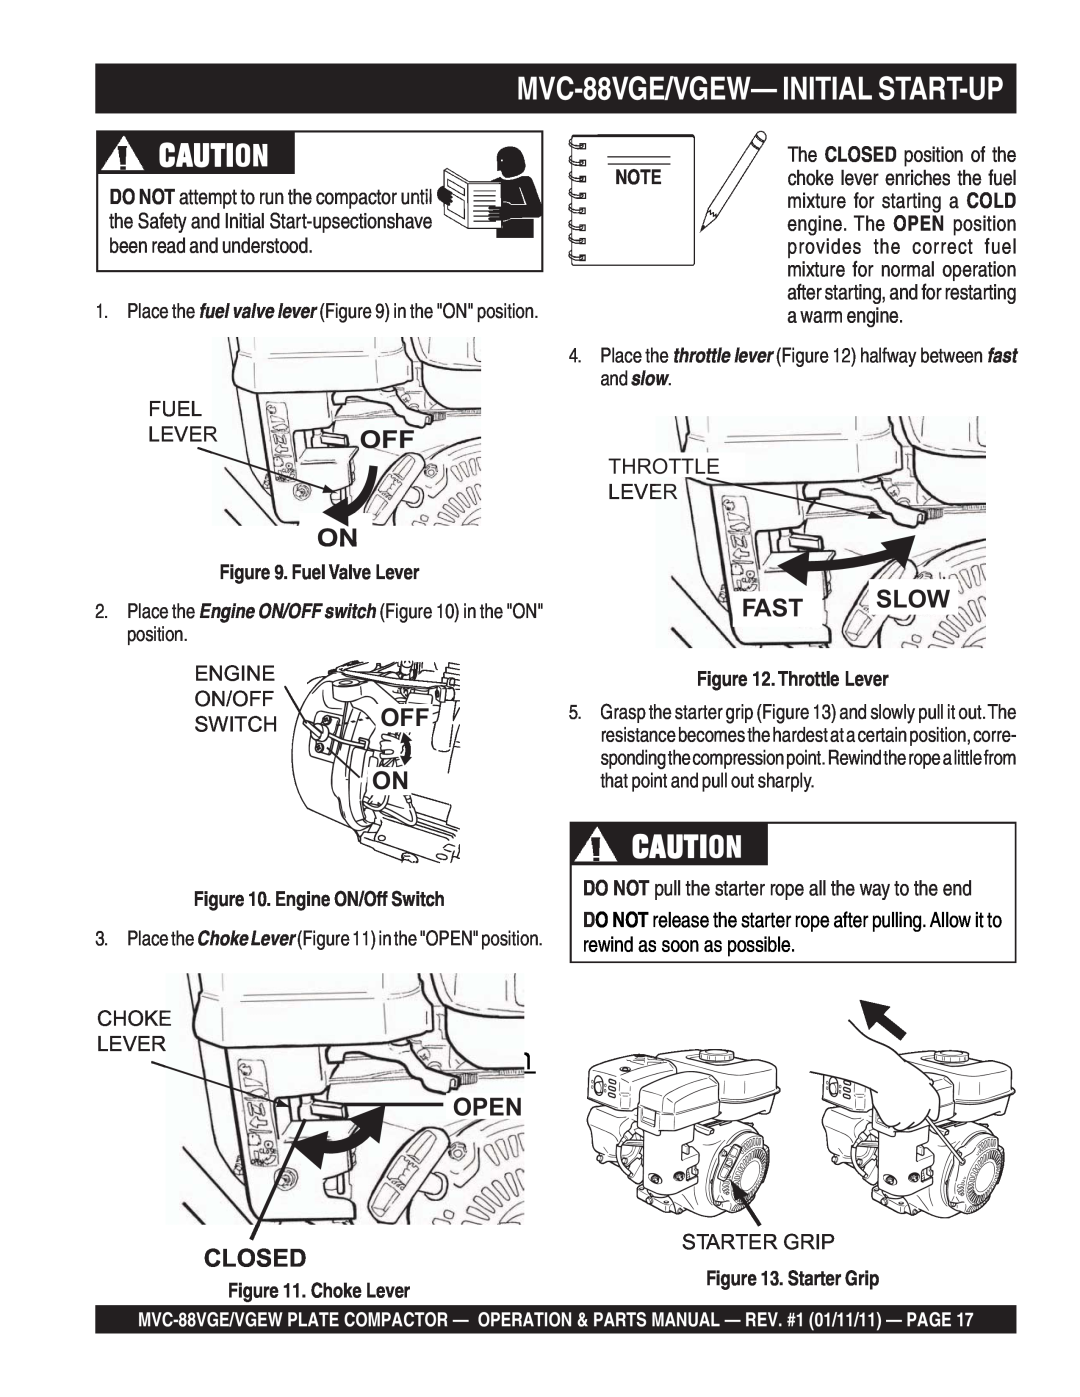 Multiquip manual MVC-88VGE/VGEW- INITIAL START-UP, Nnnn, Fast Slow, Open, Closed, Fuel Valve Lever, Throttle Lever 